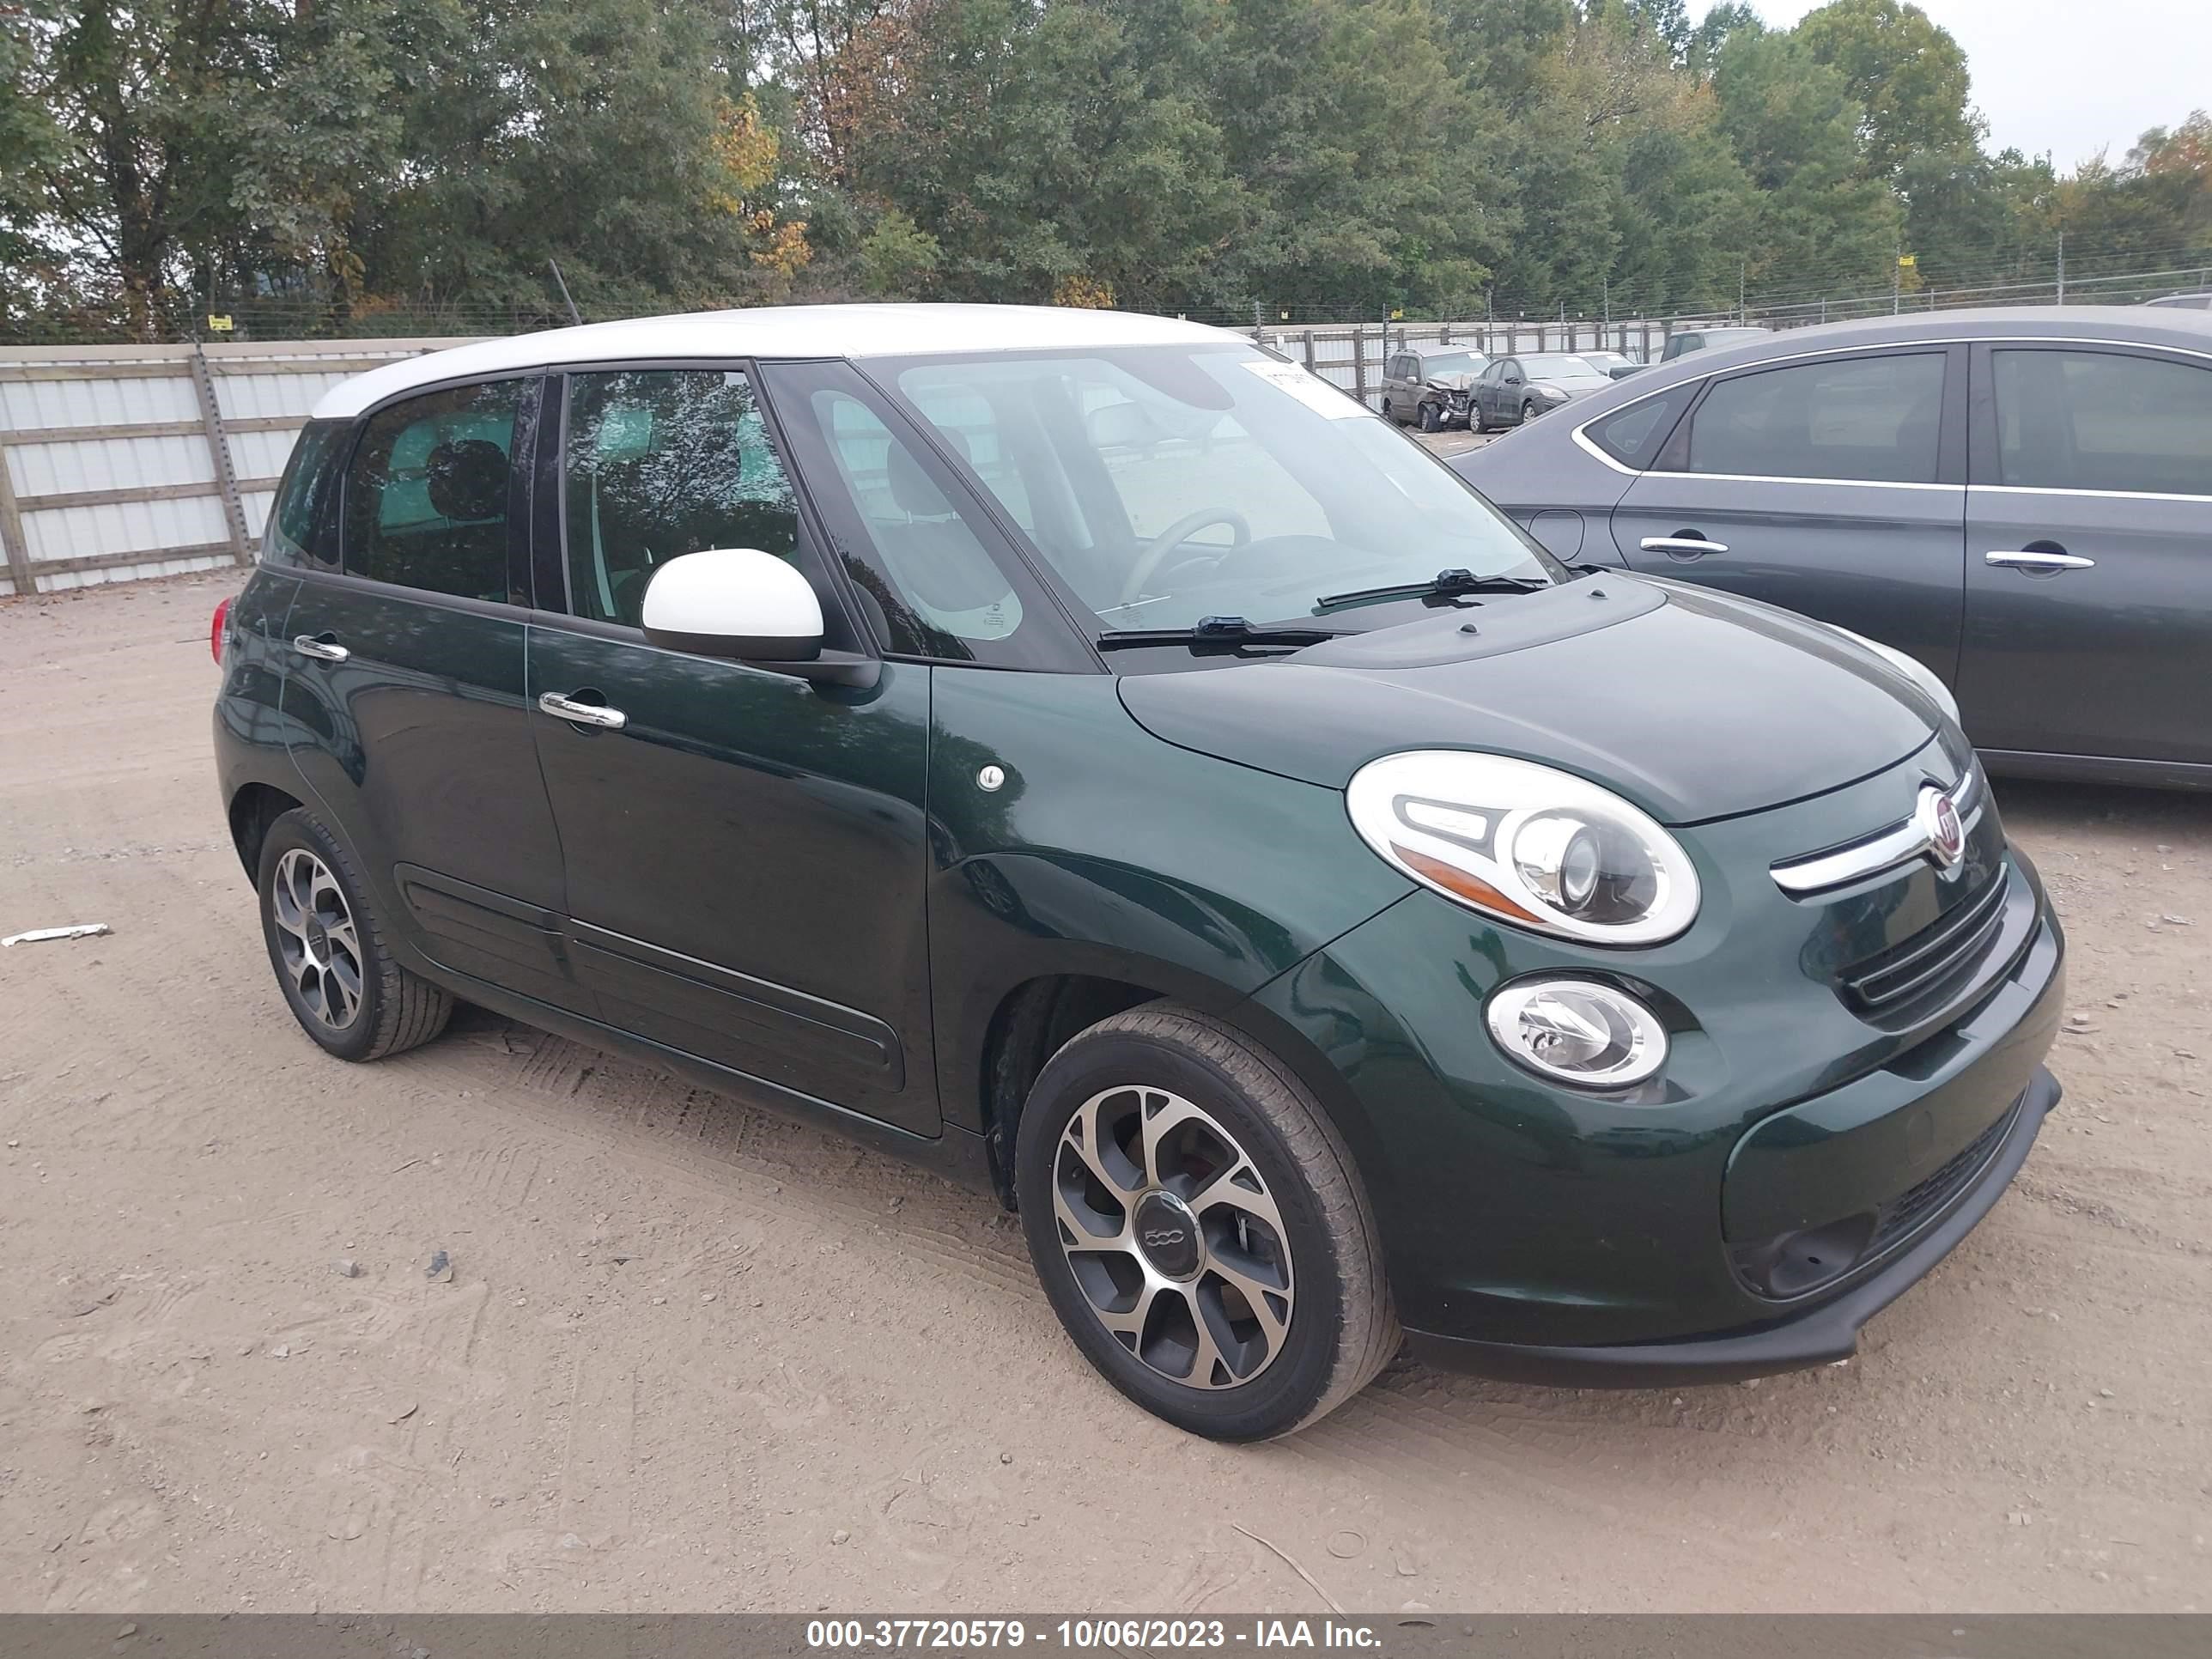 vin: ZFBCFABH9EZ026459 ZFBCFABH9EZ026459 2014 fiat 500l 1400 for Sale in 37914, 3634 E. Governor John Sevier Hwy, Knoxville, Tennessee, USA